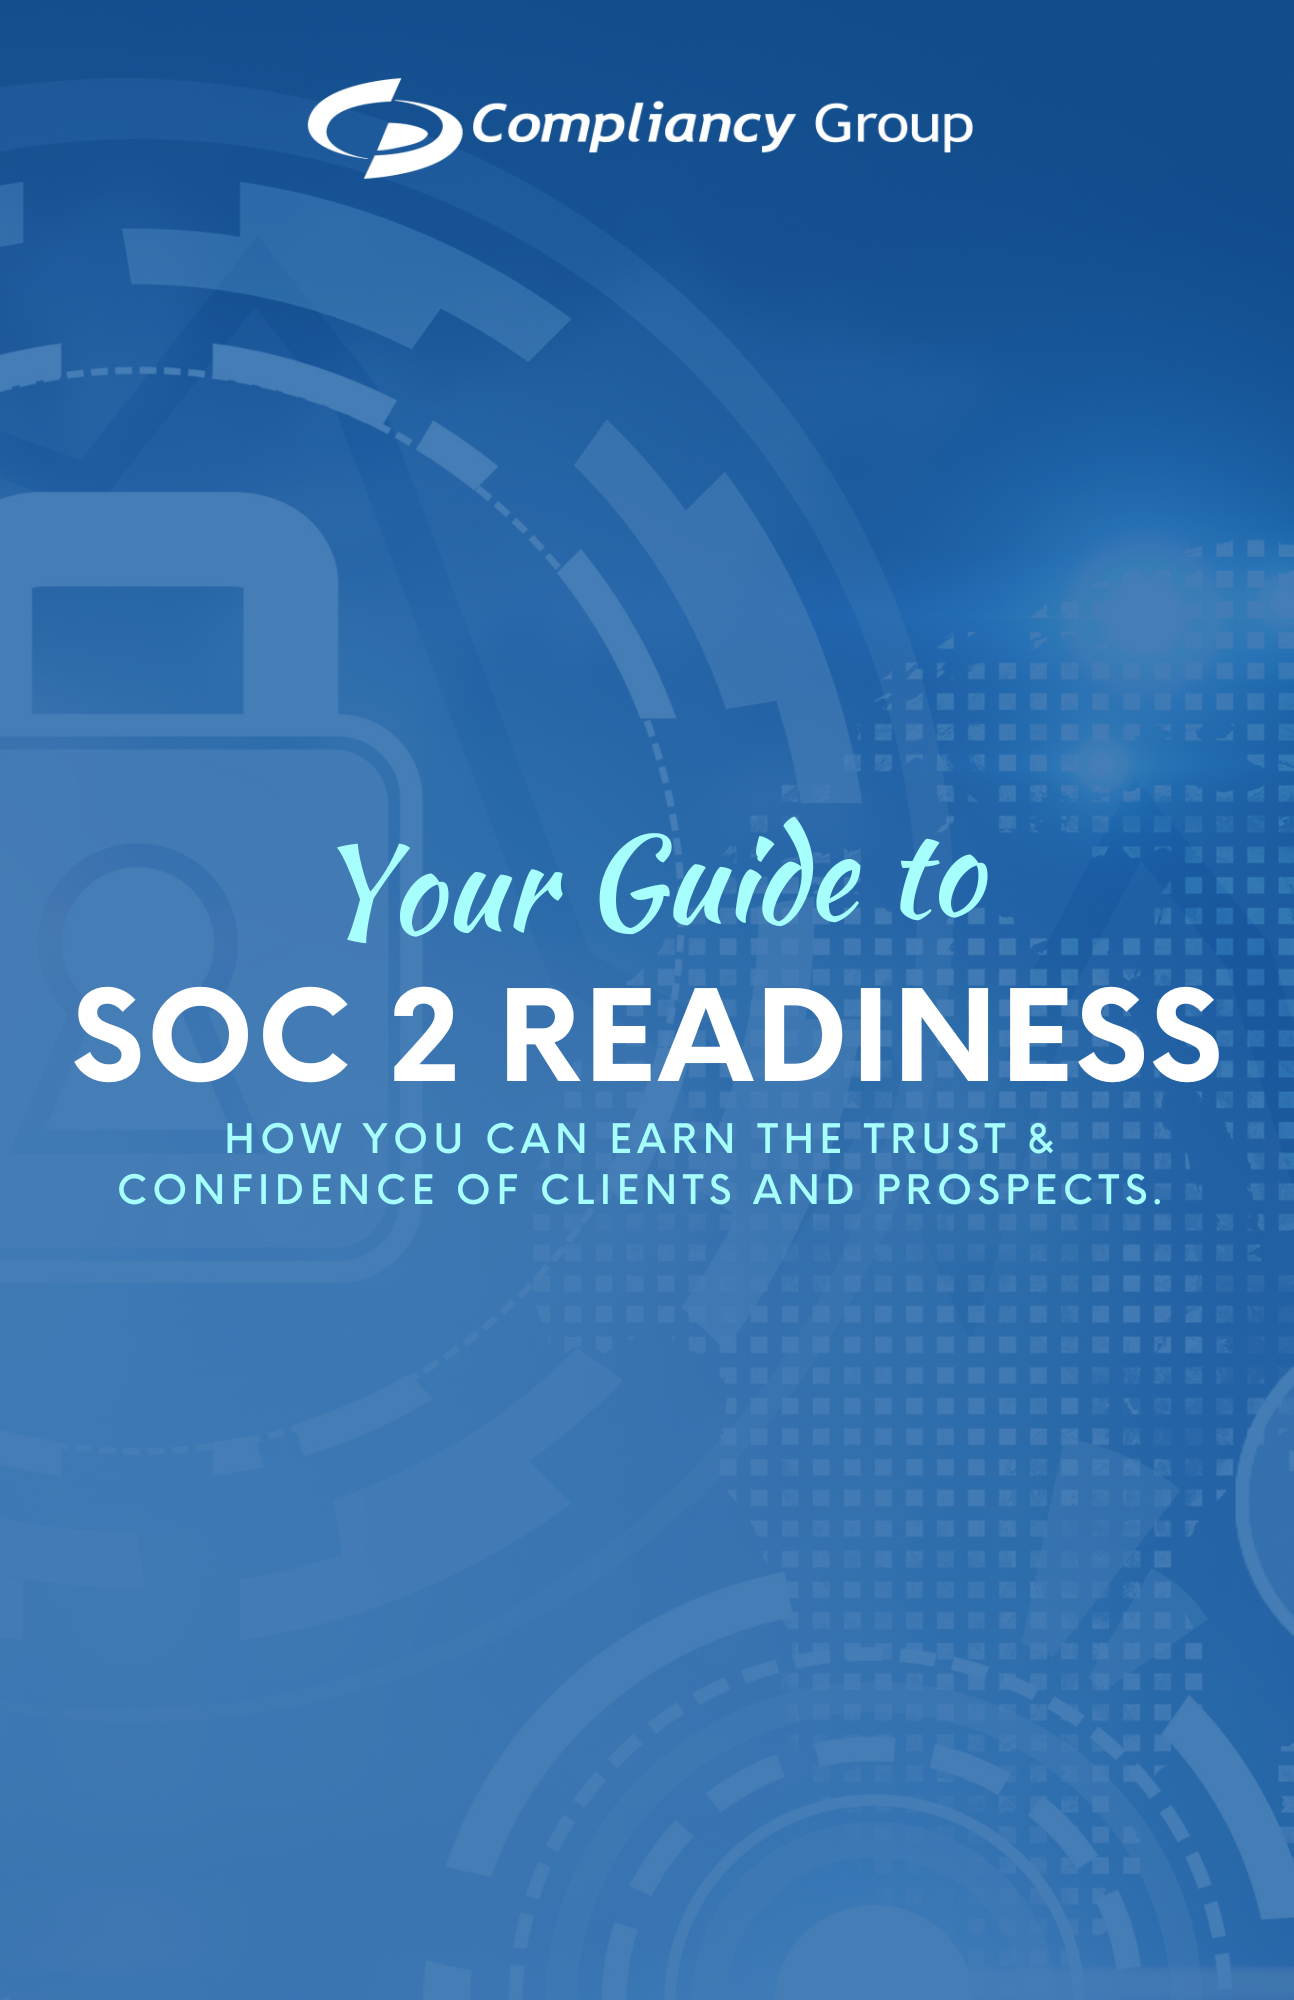 Your Guide to SOC 2 Readiness